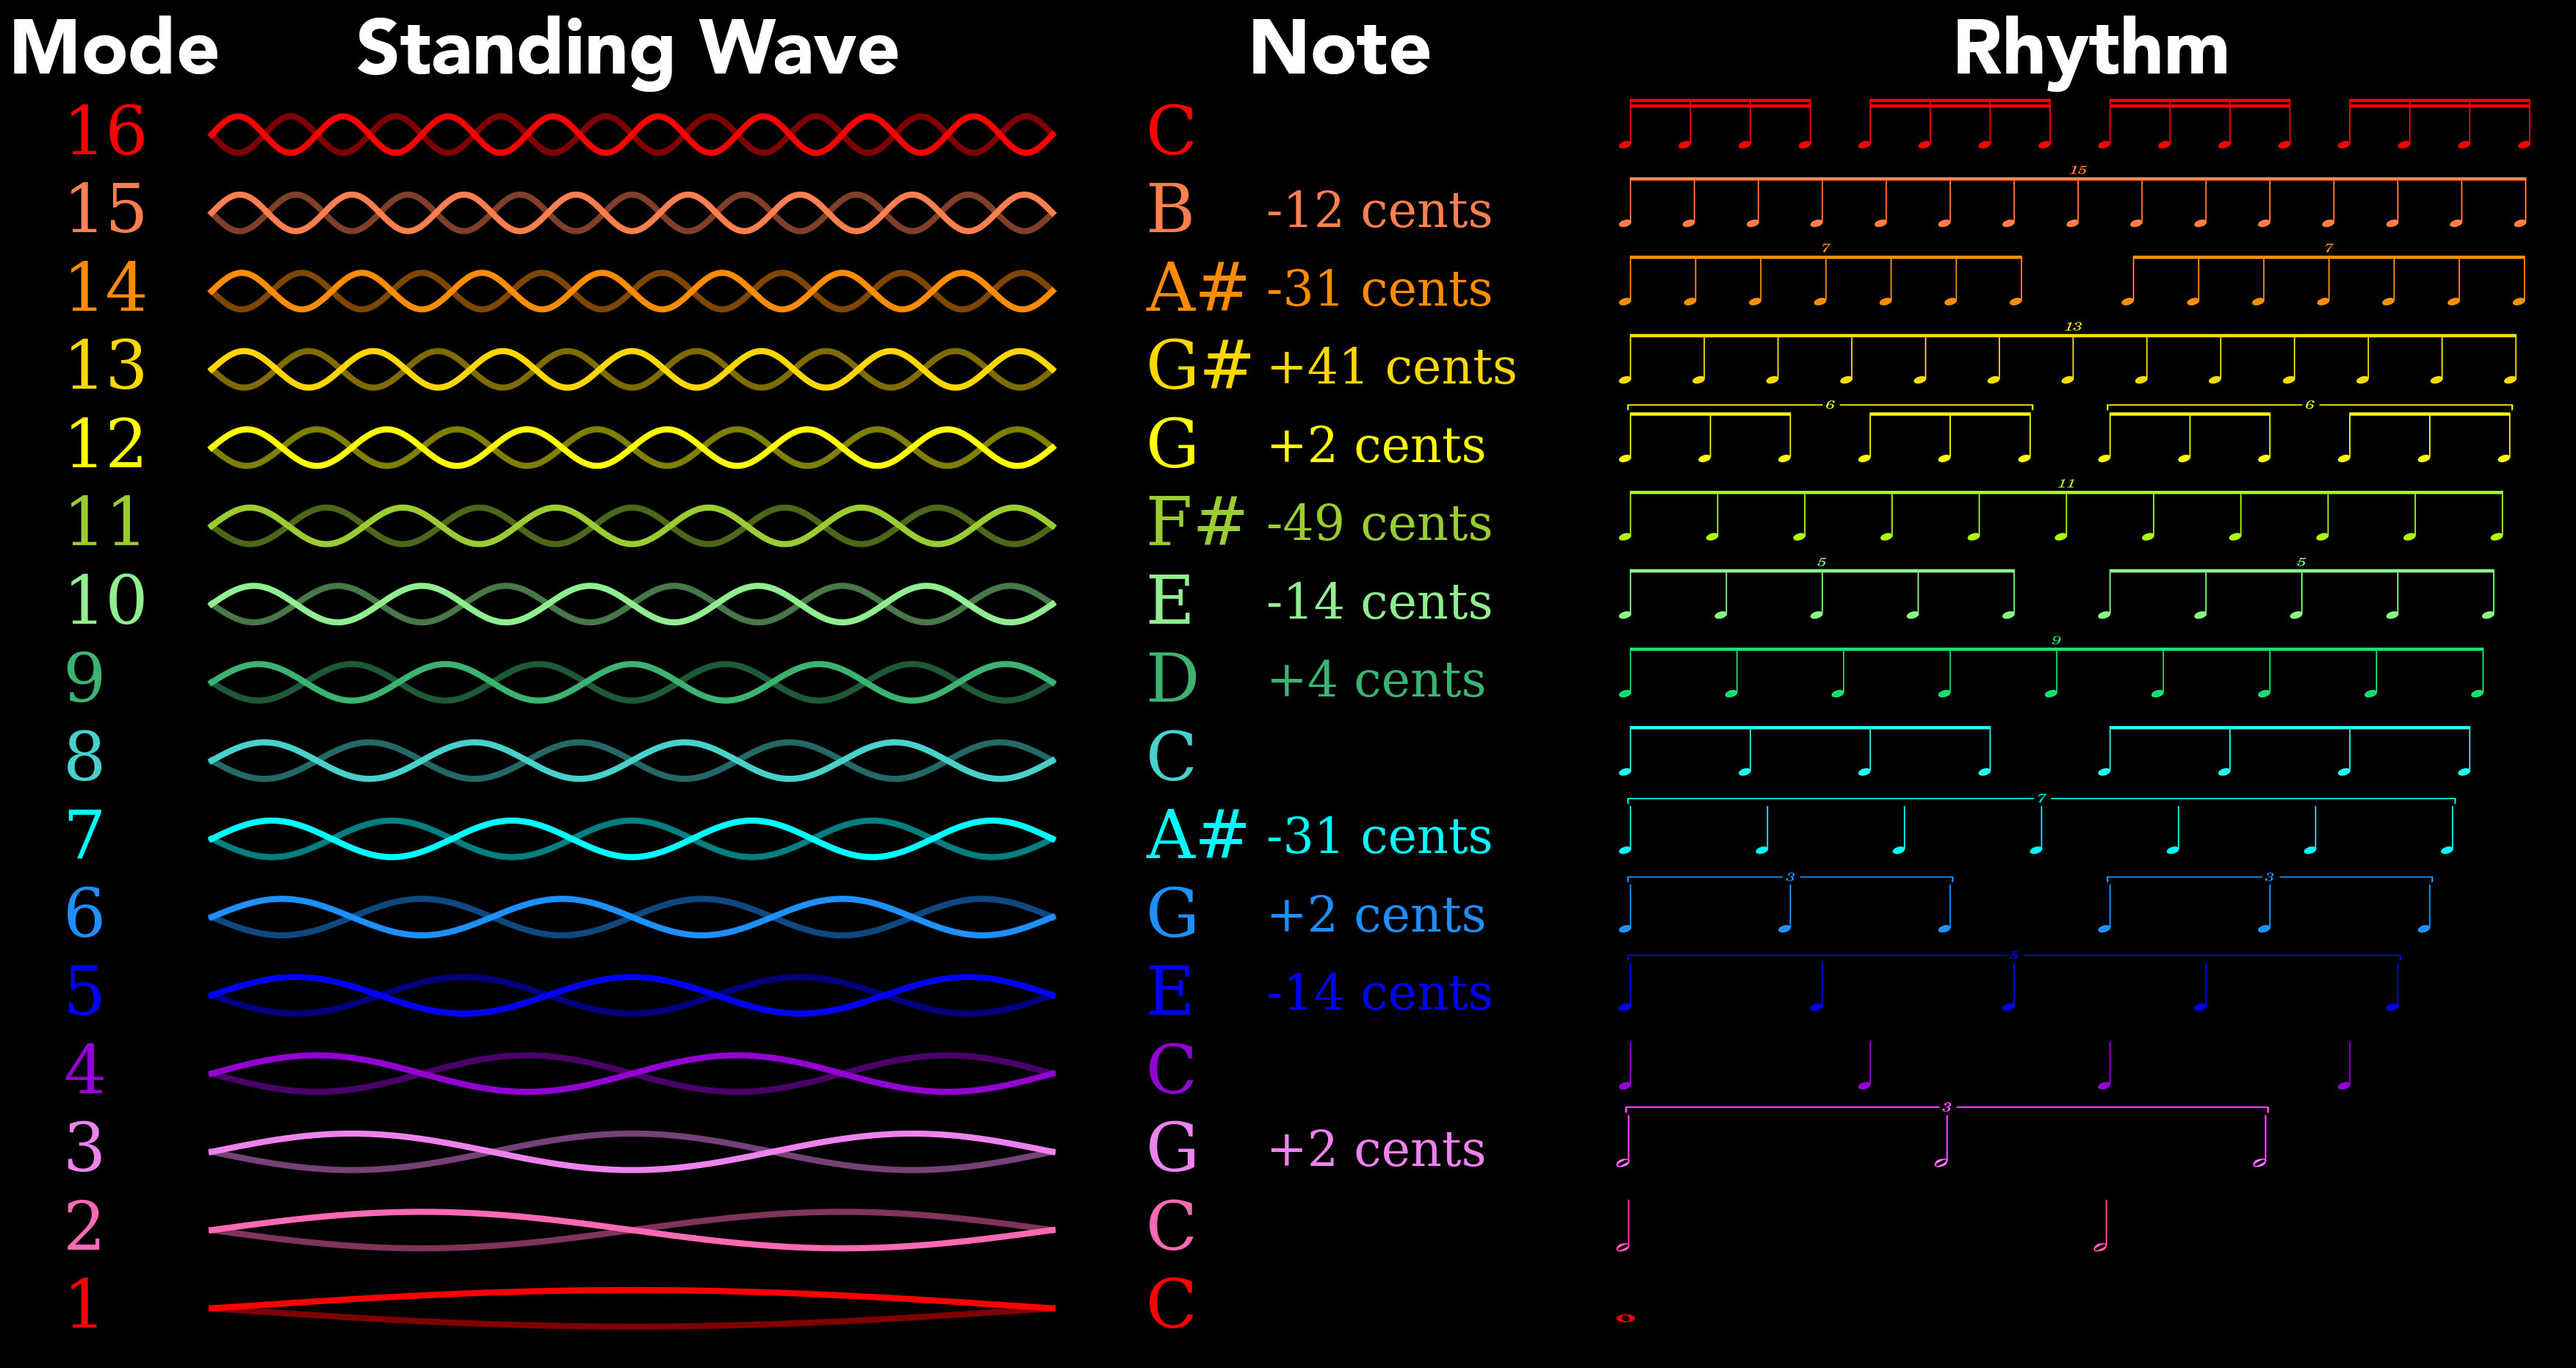 The first 16 modes of the harmonic series as standing waves, musical notes, and rhythms. The notes of the harmonic series deviate from the 'equal tempered' notes found on a piano (1 cent = 1 per cent of a note).